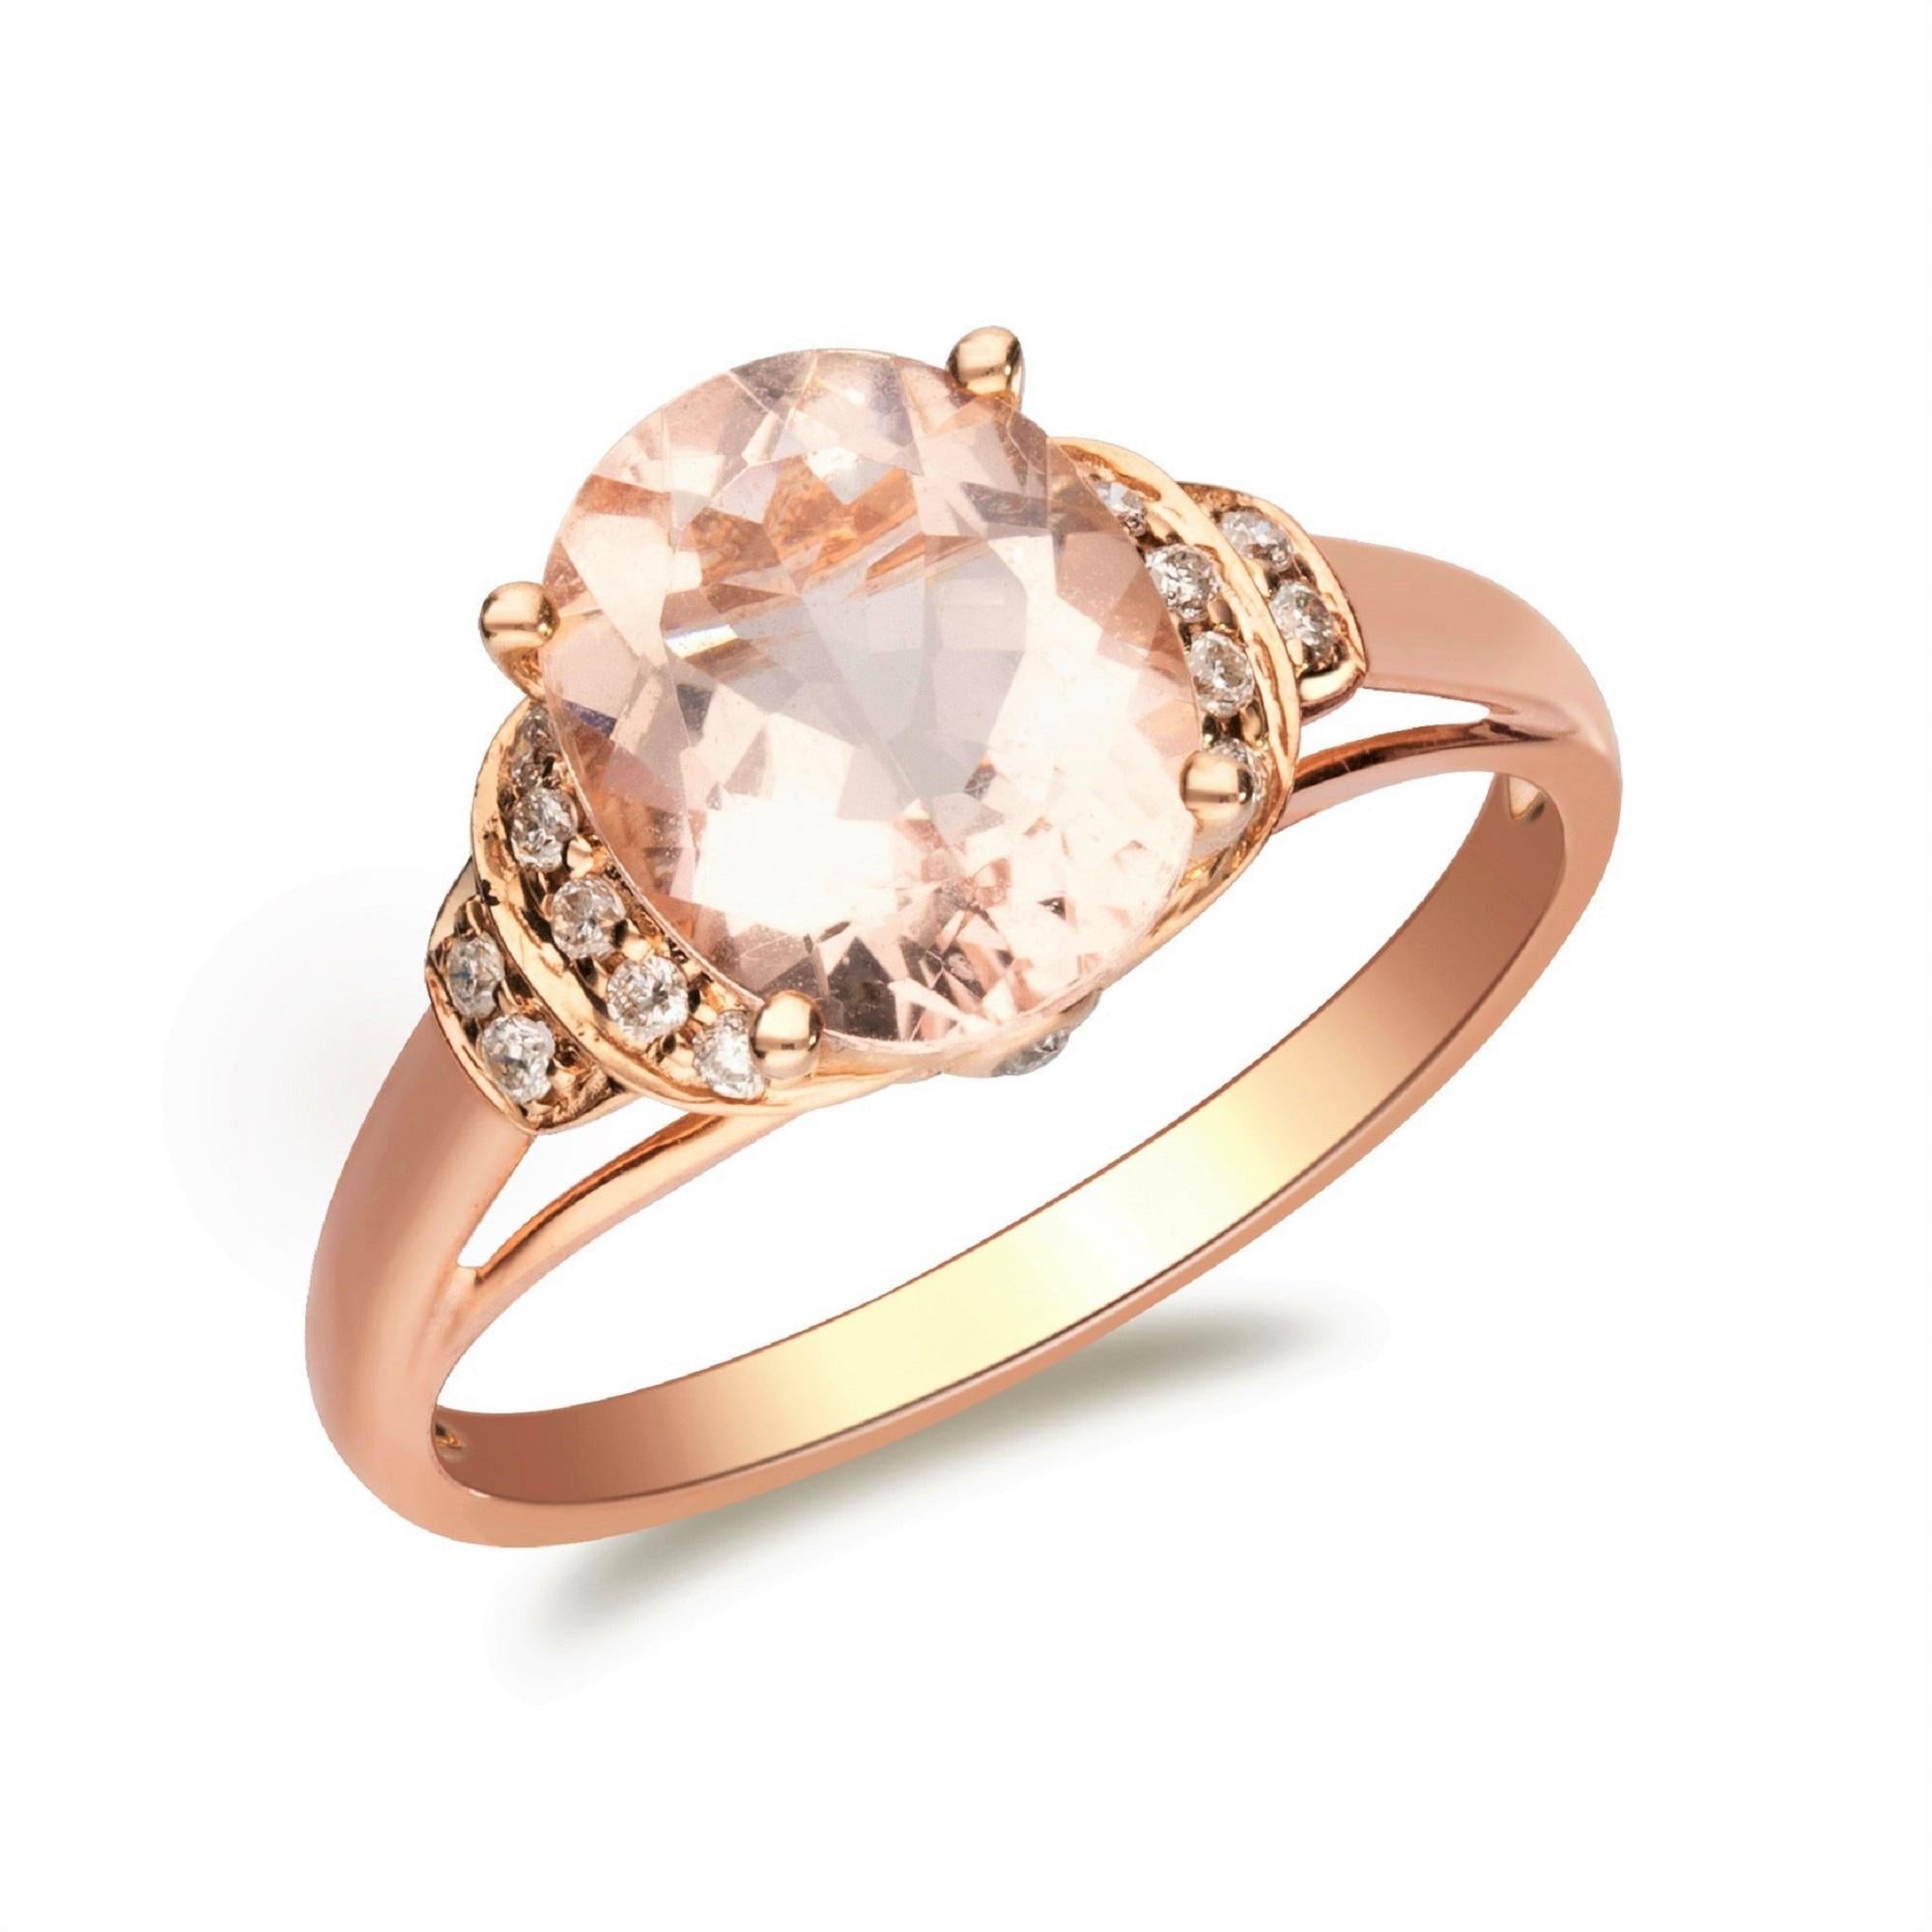 Women's 2.19 Carat Morganite Oval Cut Diamond Accents 10K Rose Gold Ring For Sale